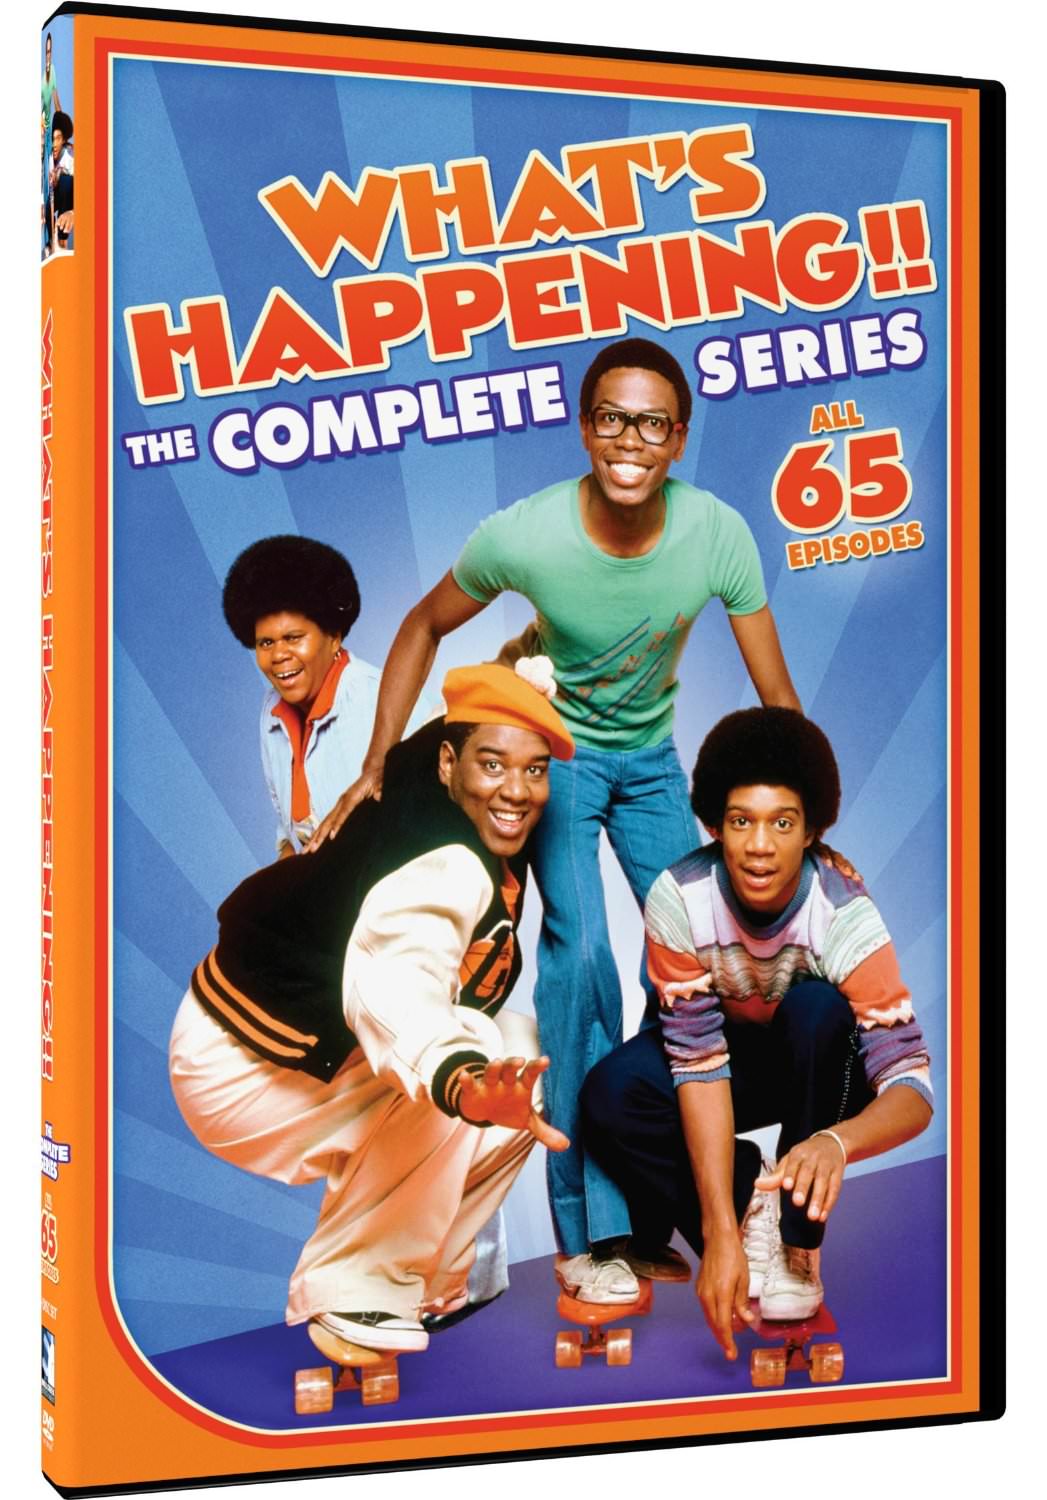 What's Happening: The Complete Series - Seasons 1-3, DVD